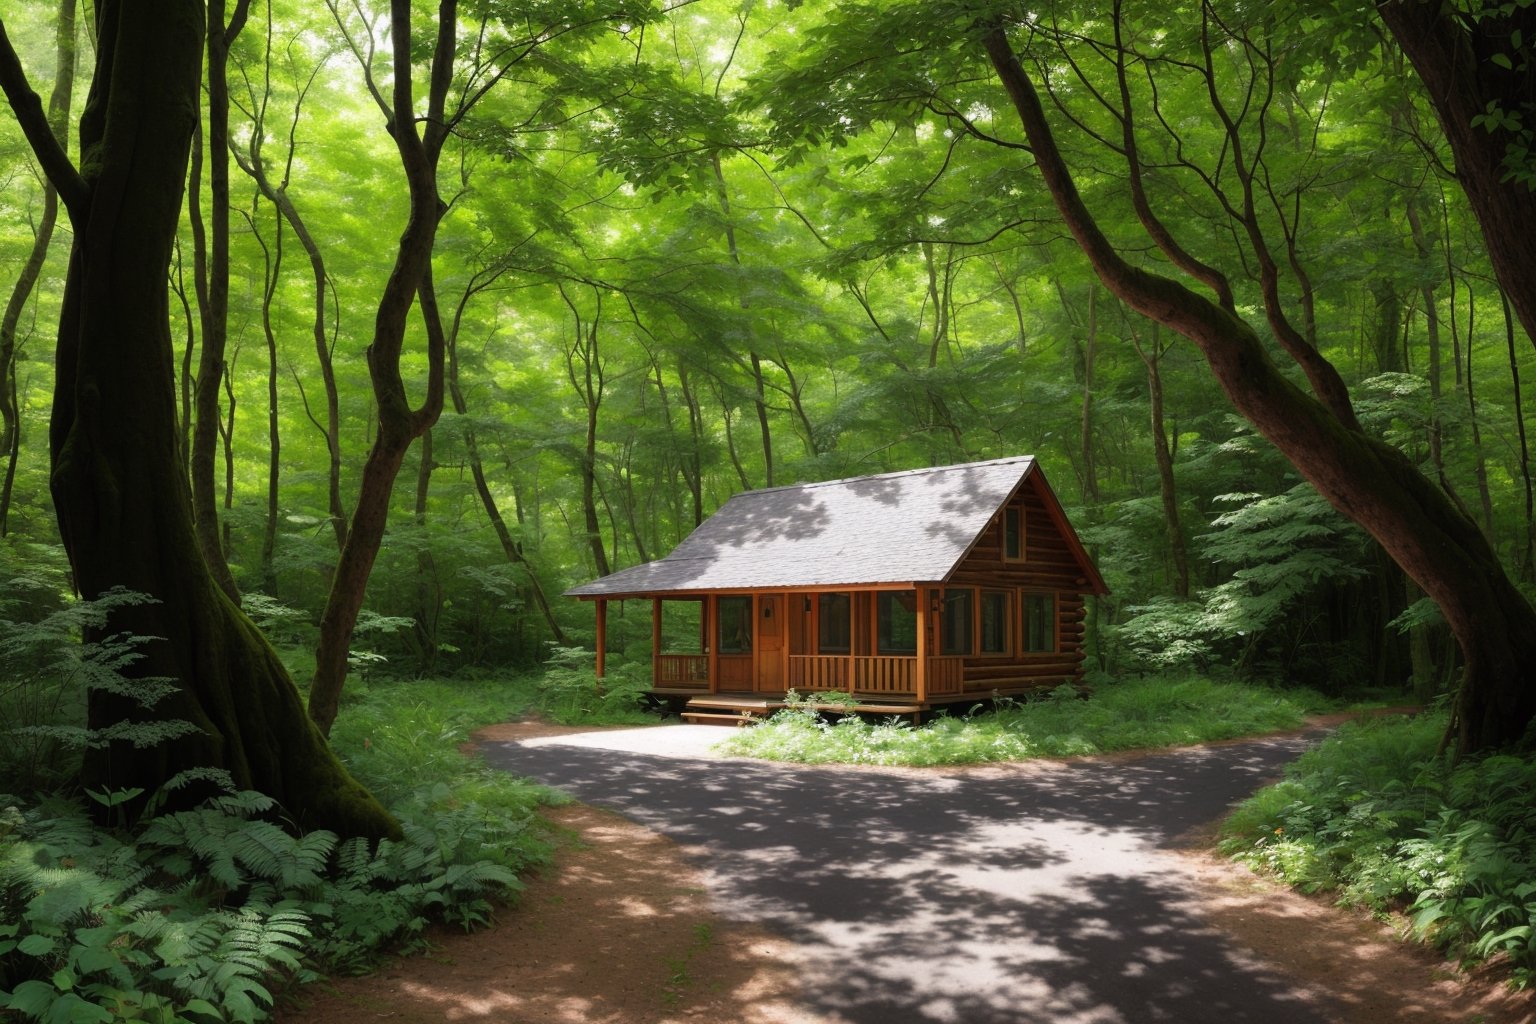 A serene, winding forest path meandering through a lush, verdant woodland environment, sunlight filtering through the canopy of trees, creating a tranquil and healing atmosphere, There is a small cabin in the distance